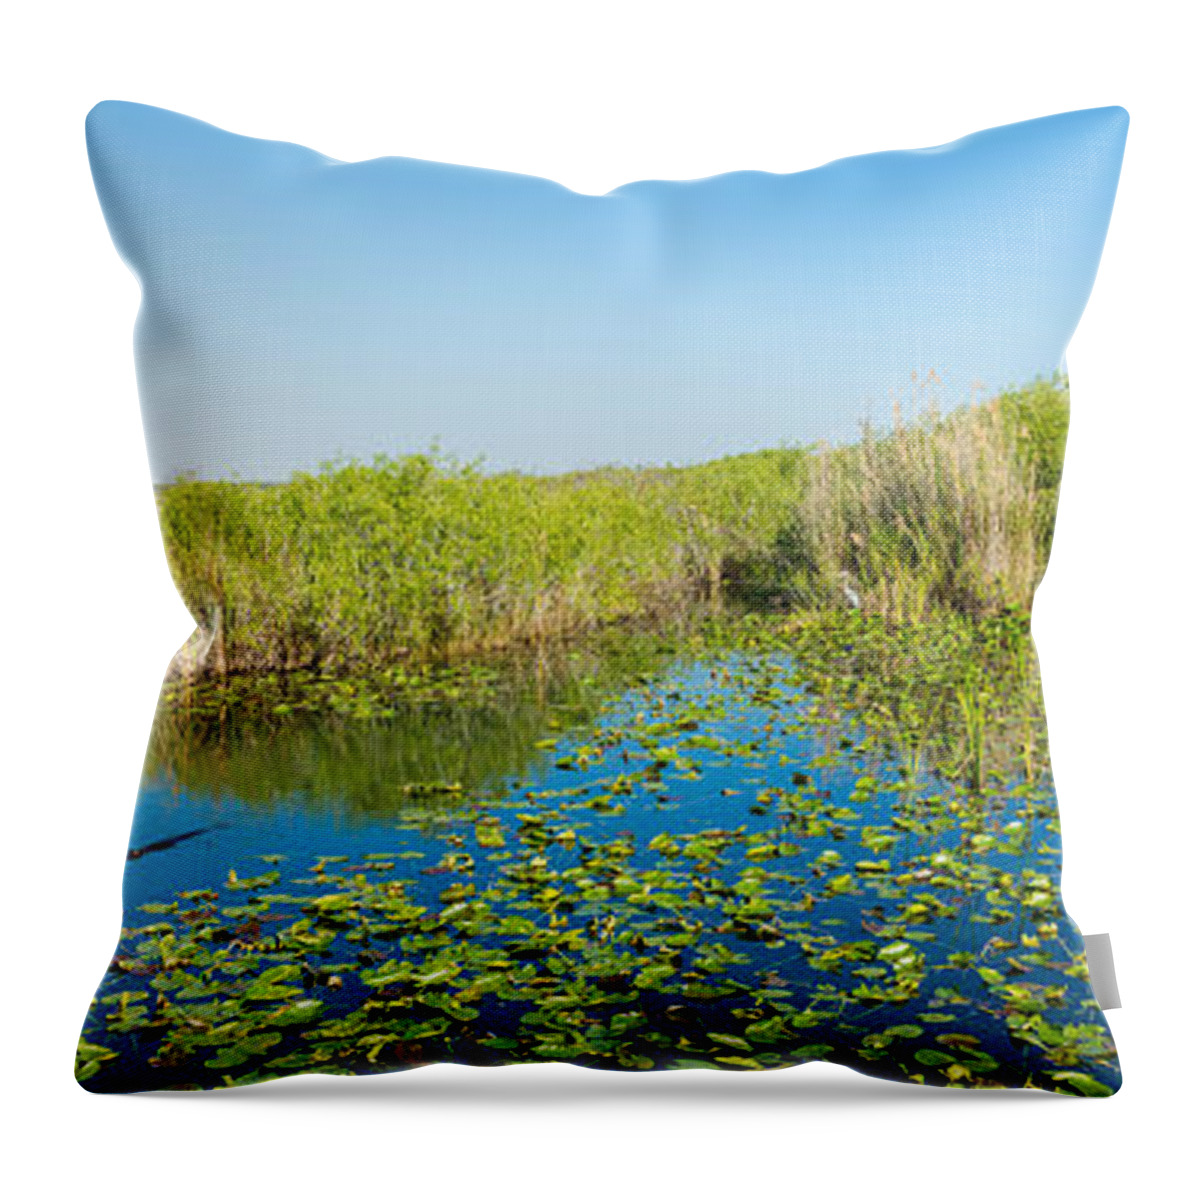 Photography Throw Pillow featuring the photograph Lily Pads In The Lake, Anhinga Trail by Panoramic Images